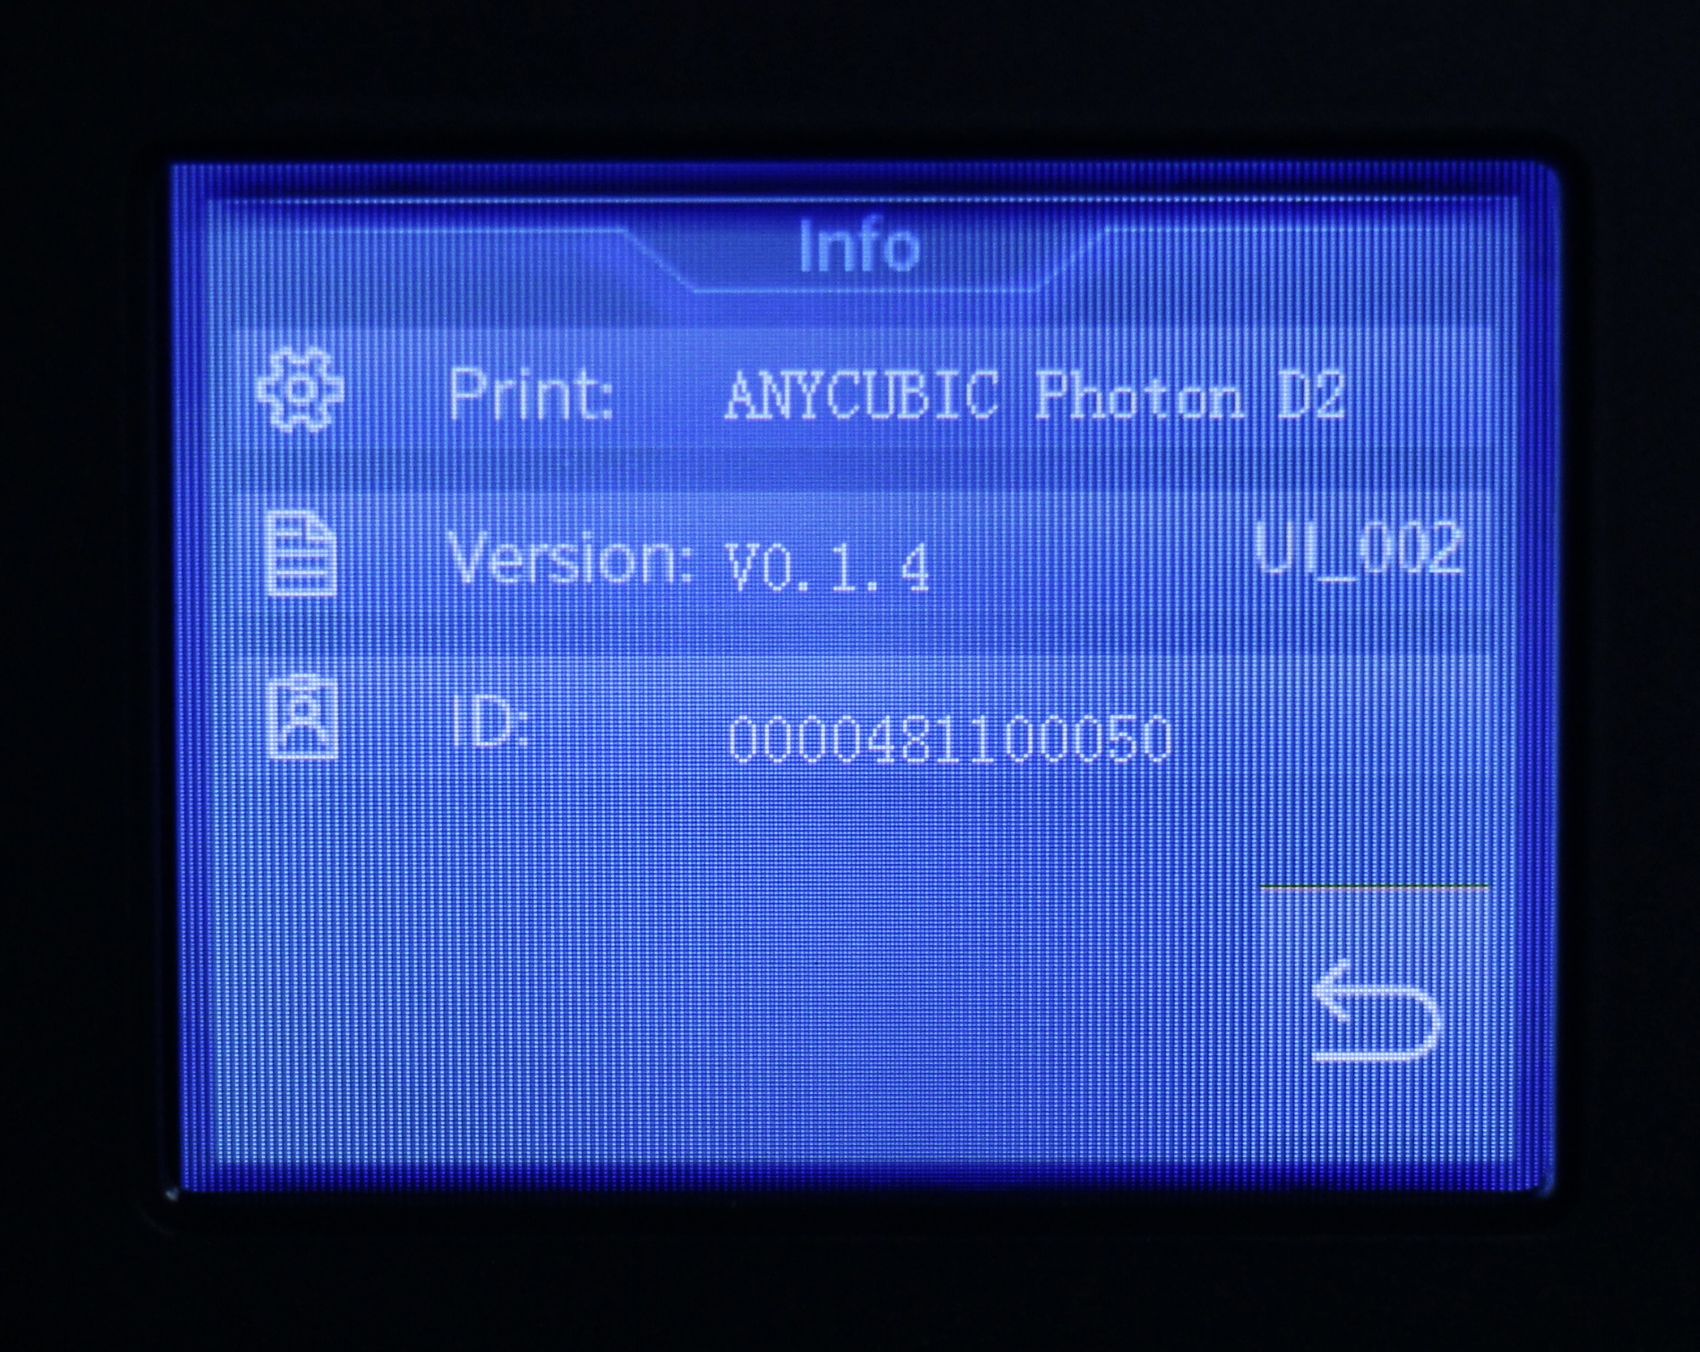 Anycubic Photon D2 Screen Interface3 | Anycubic Photon D2 Review: DLP Resin 3D Printer